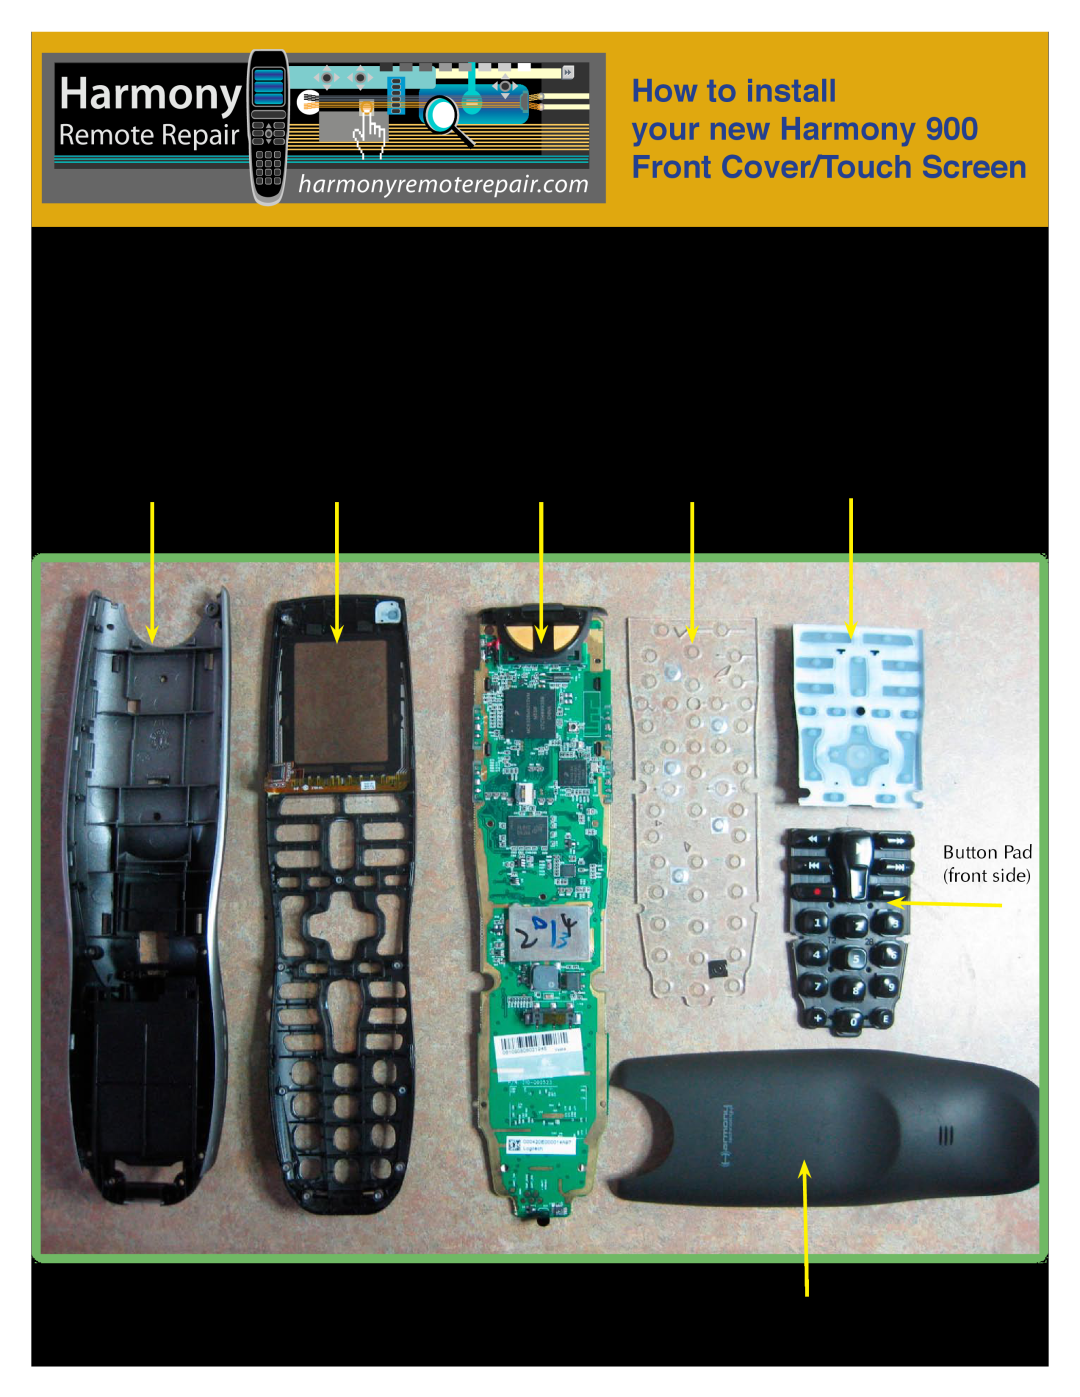 Logitech manual How to install, your new Harmony 900 Front Cover/Touch Screen, Remote Repair 